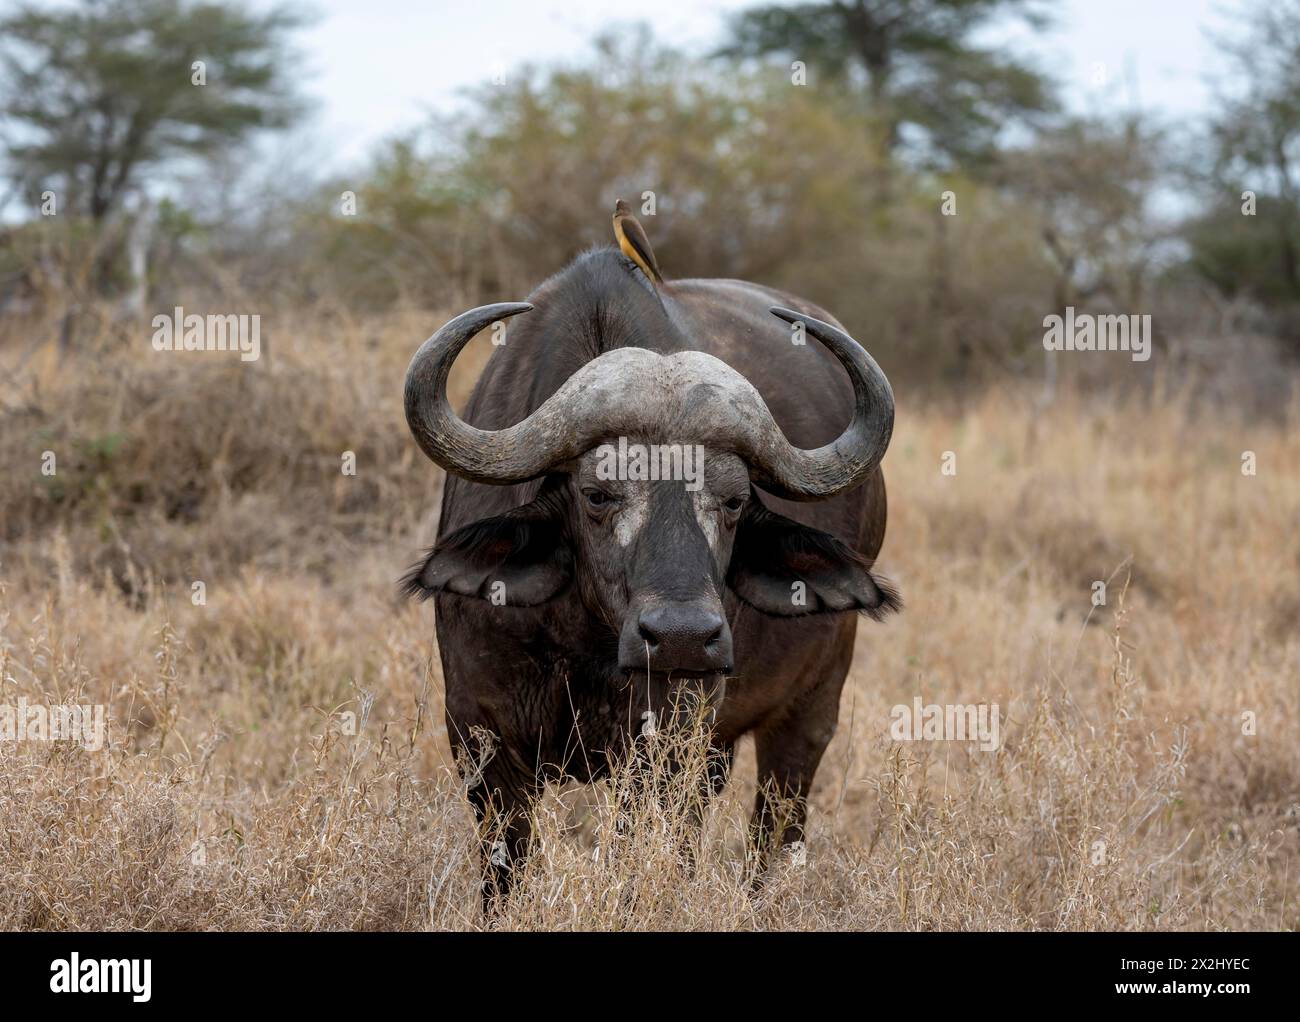 African buffalo (Syncerus caffer caffer) with yellowbill oxpecker (Buphagus africanus), in dry grass, Kruger National Park, South Africa Stock Photo